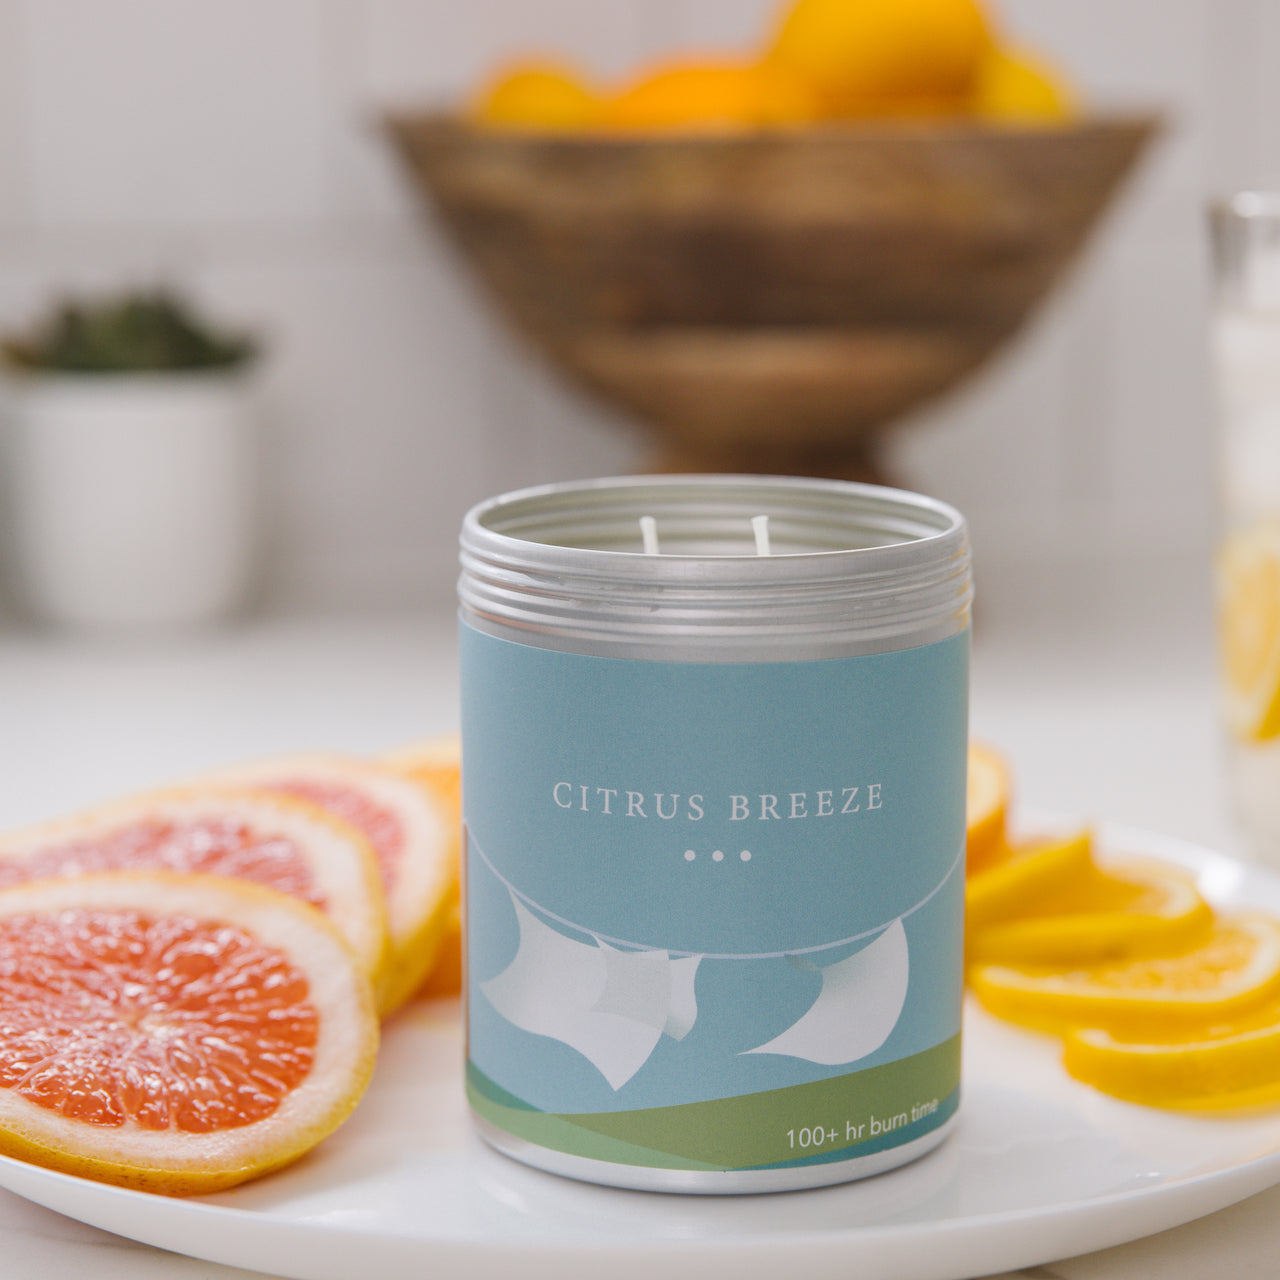 Citrus breeze candle surrounded with grapefruit and lemons